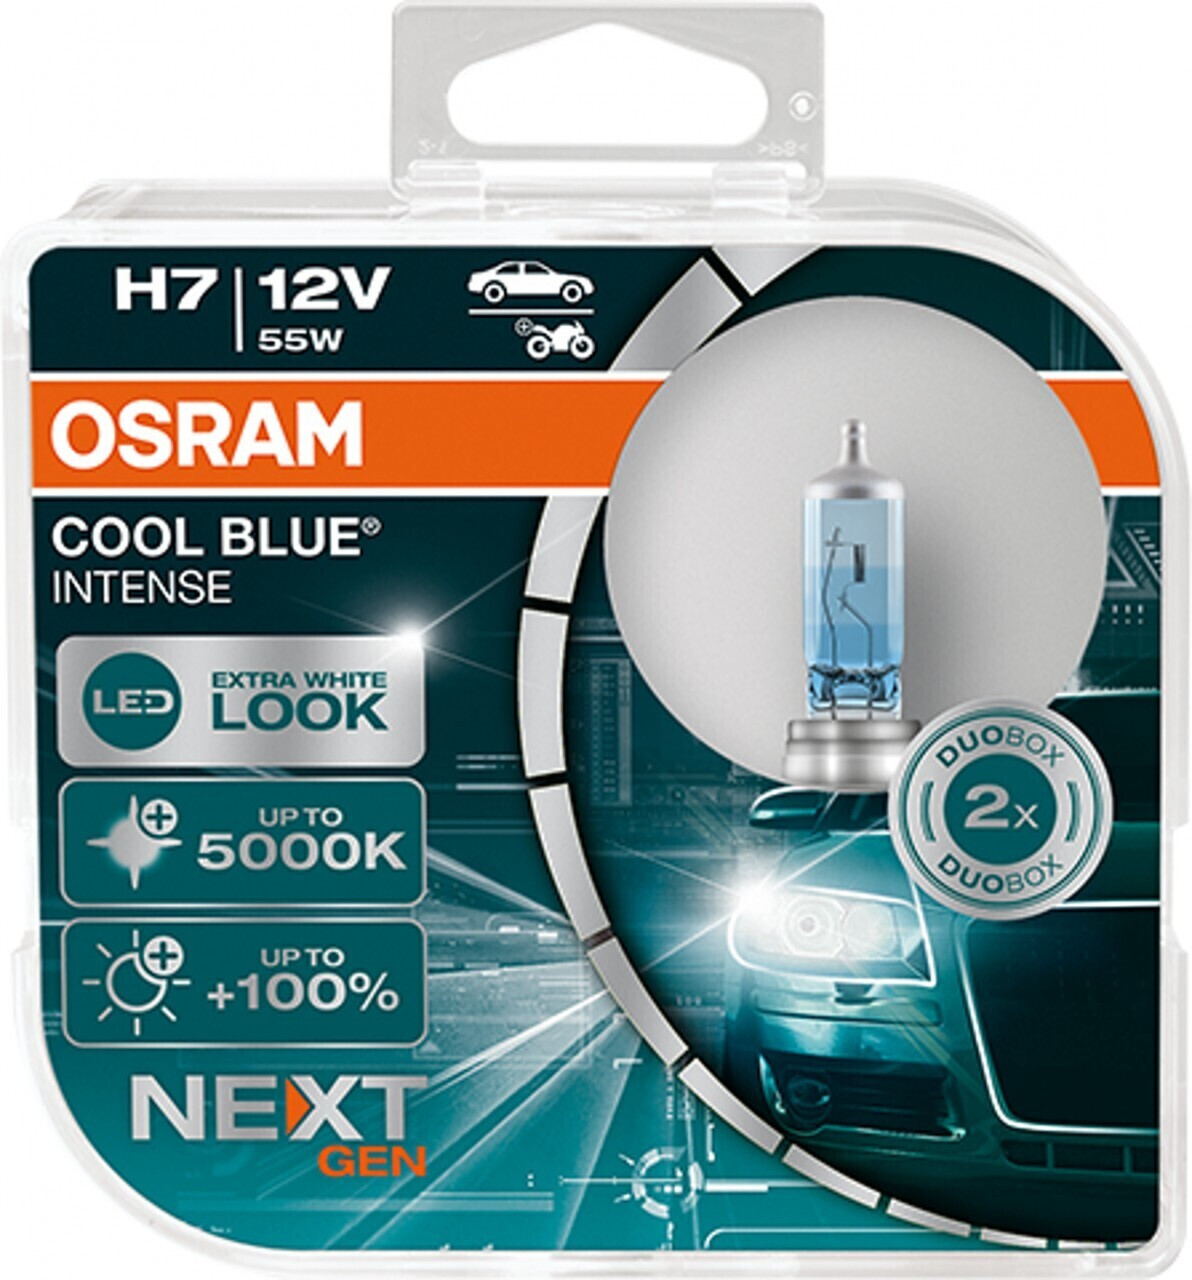 Osram Cool Blue INTENSE H7 12V 55W (64210CBN) Duo ab 9,98